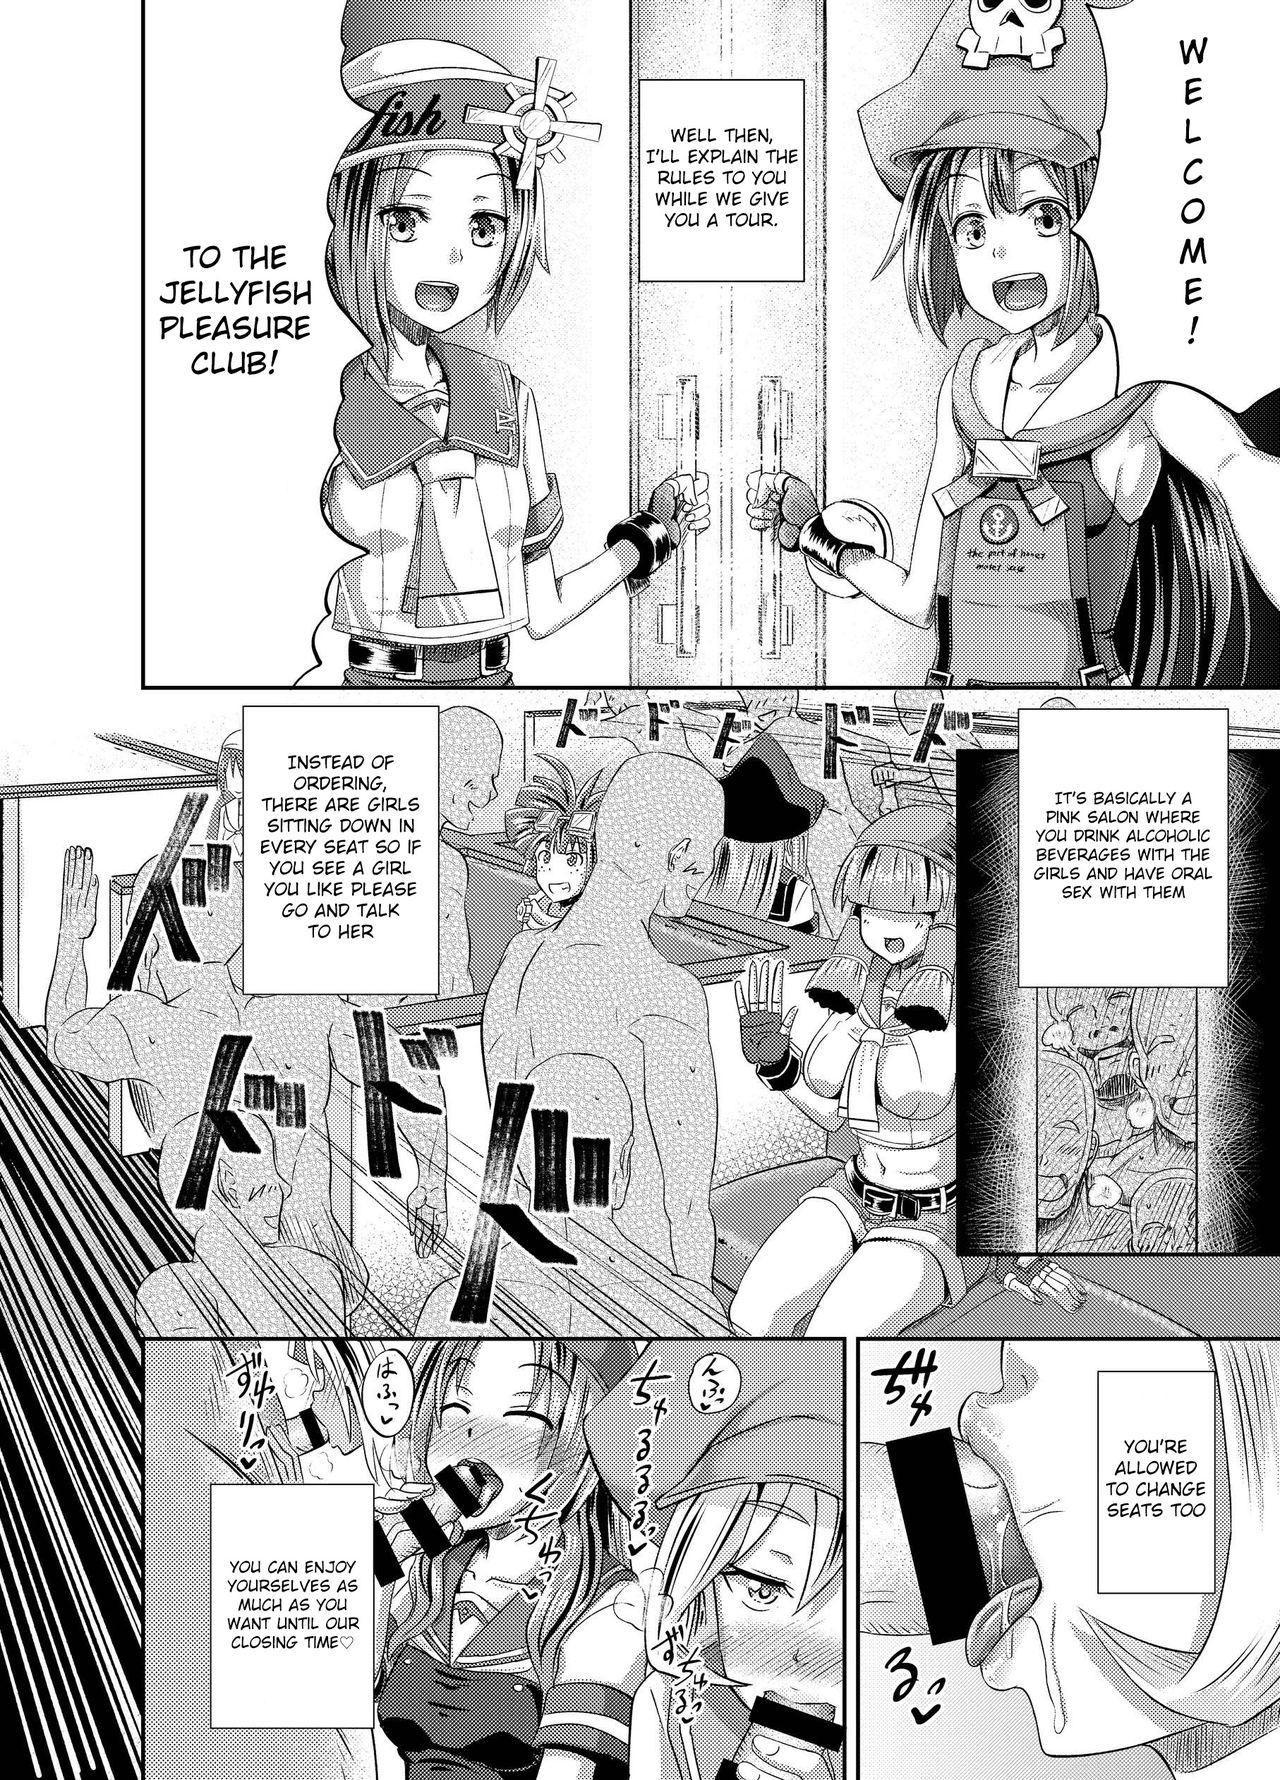 Solo Girl Jellyfish Kaizokudan e Youkoso! | Welcome to The Jellyfish Pleasure Club! - Guilty gear Pure18 - Page 3